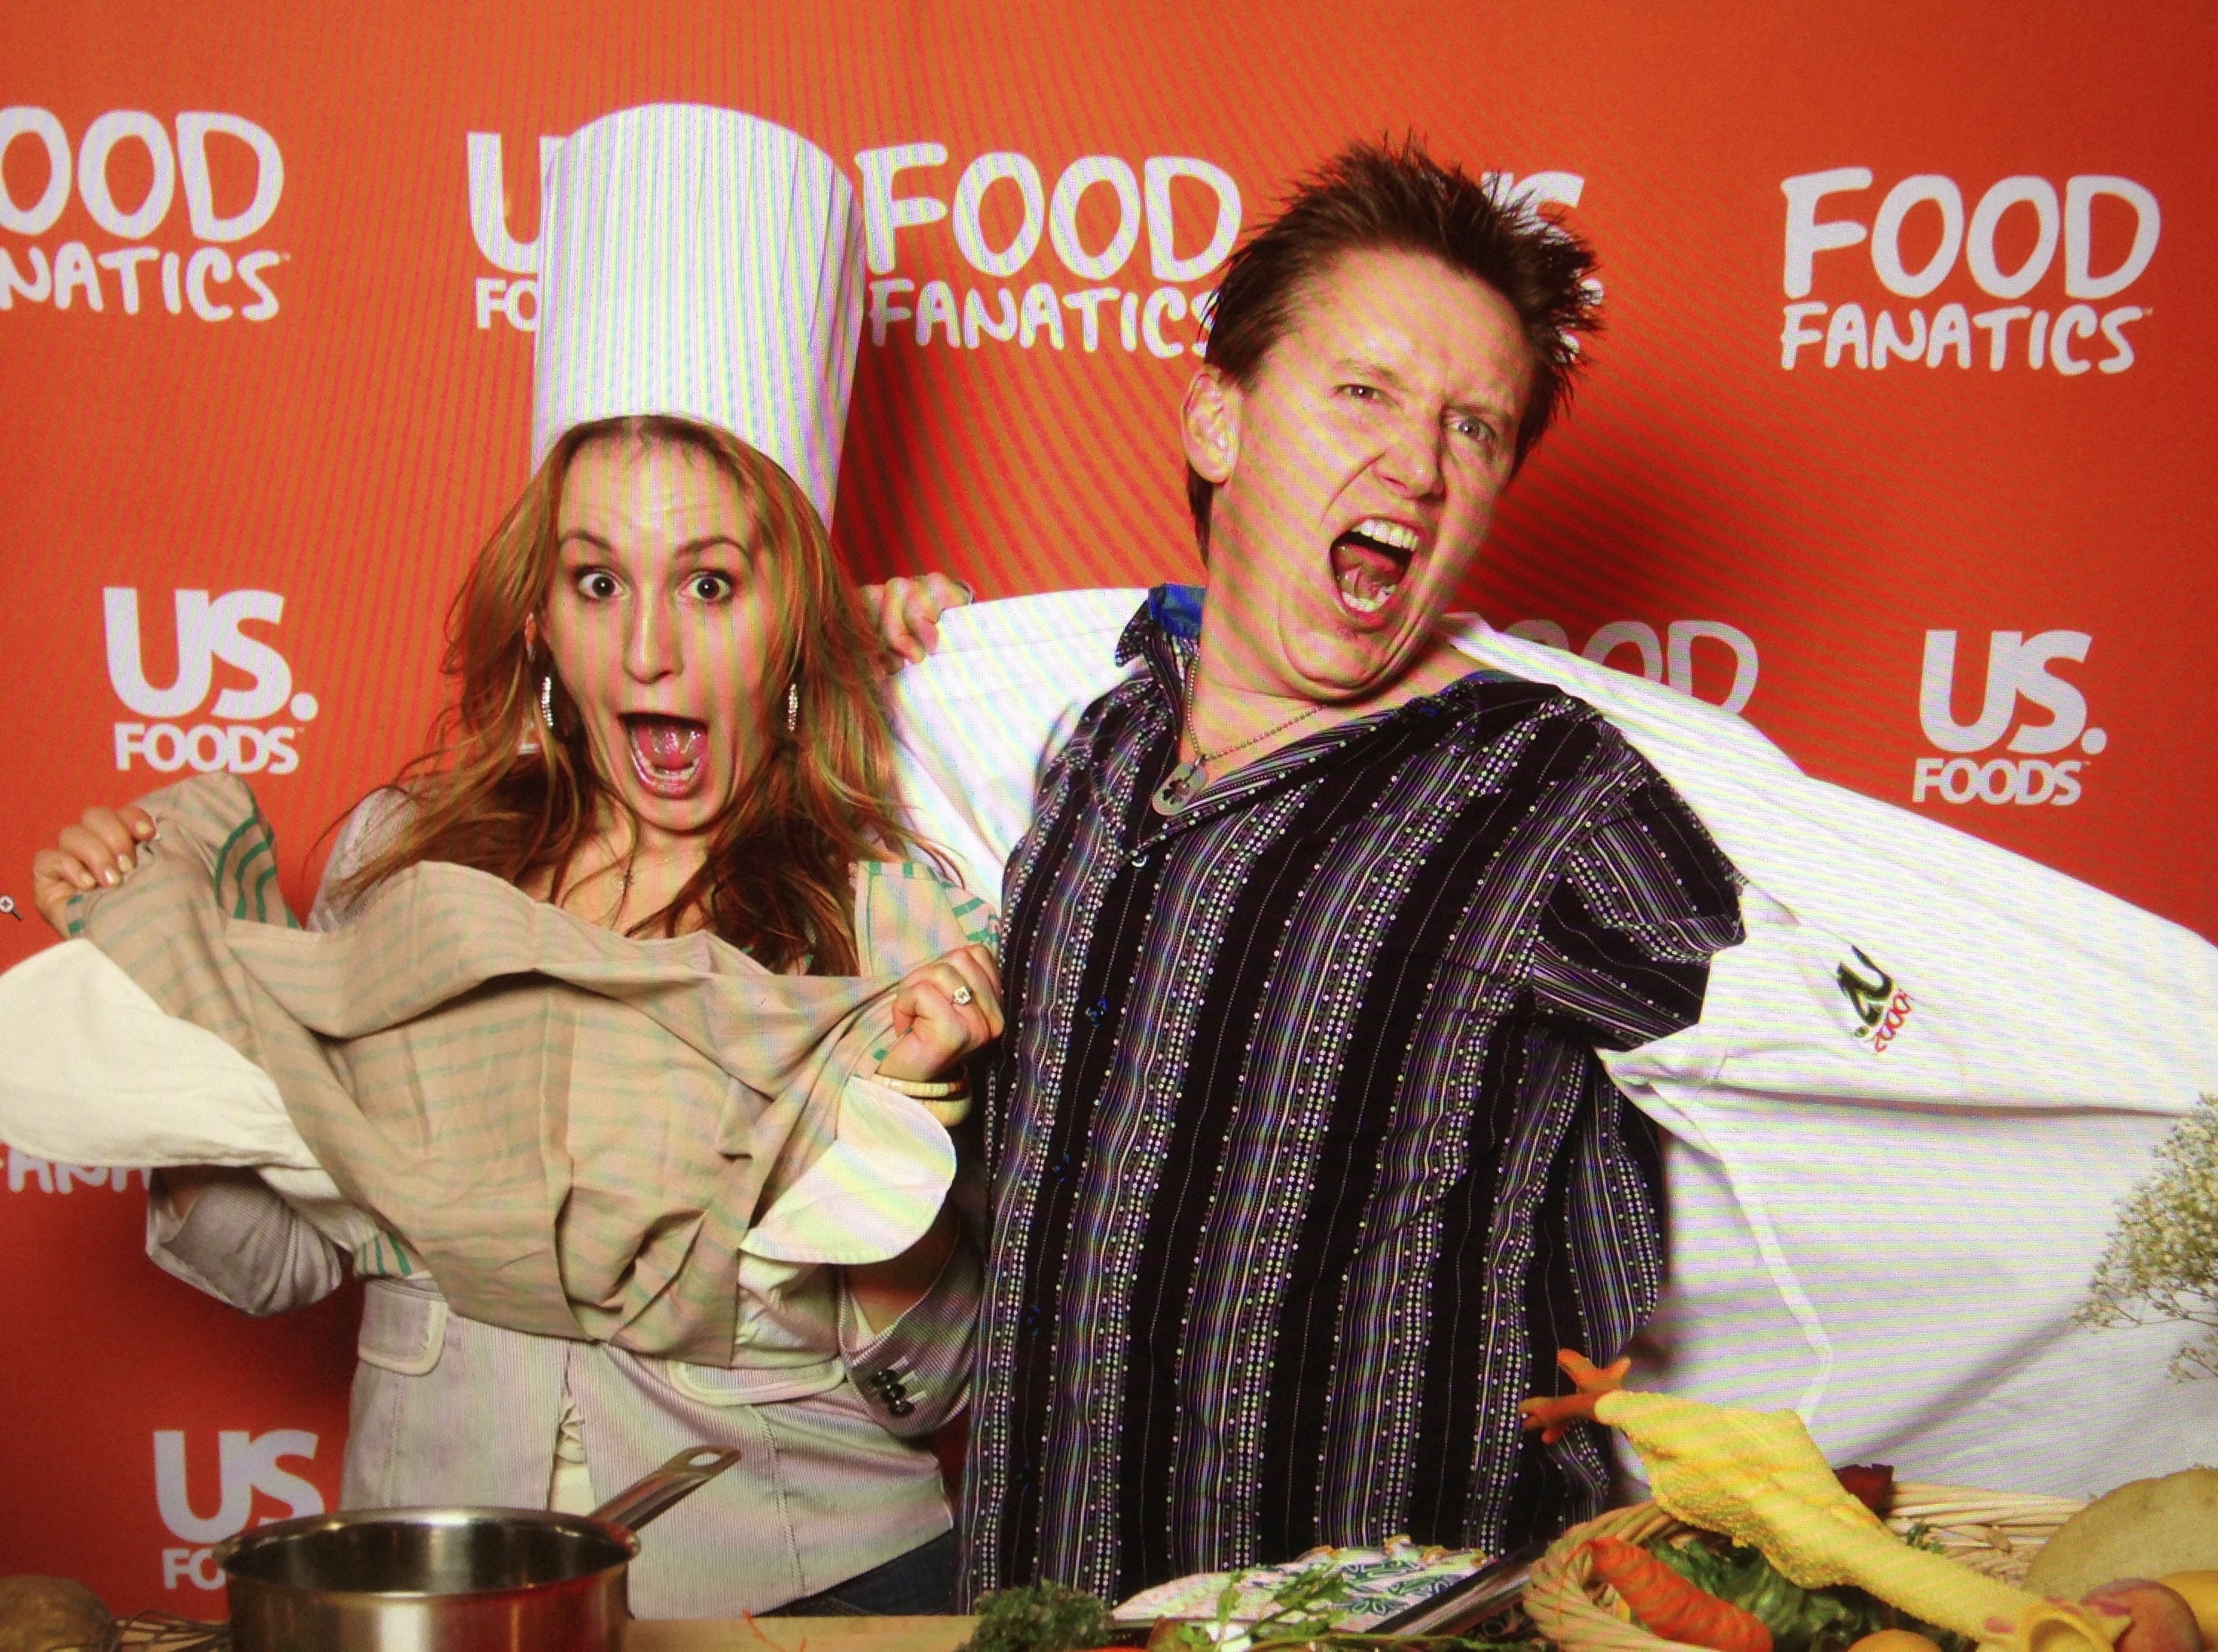 Kimberly Spencer and Spike Spencer for Don't Kill Your Date (and Other Cooking Tips) http://www.dontkillyourdate.com